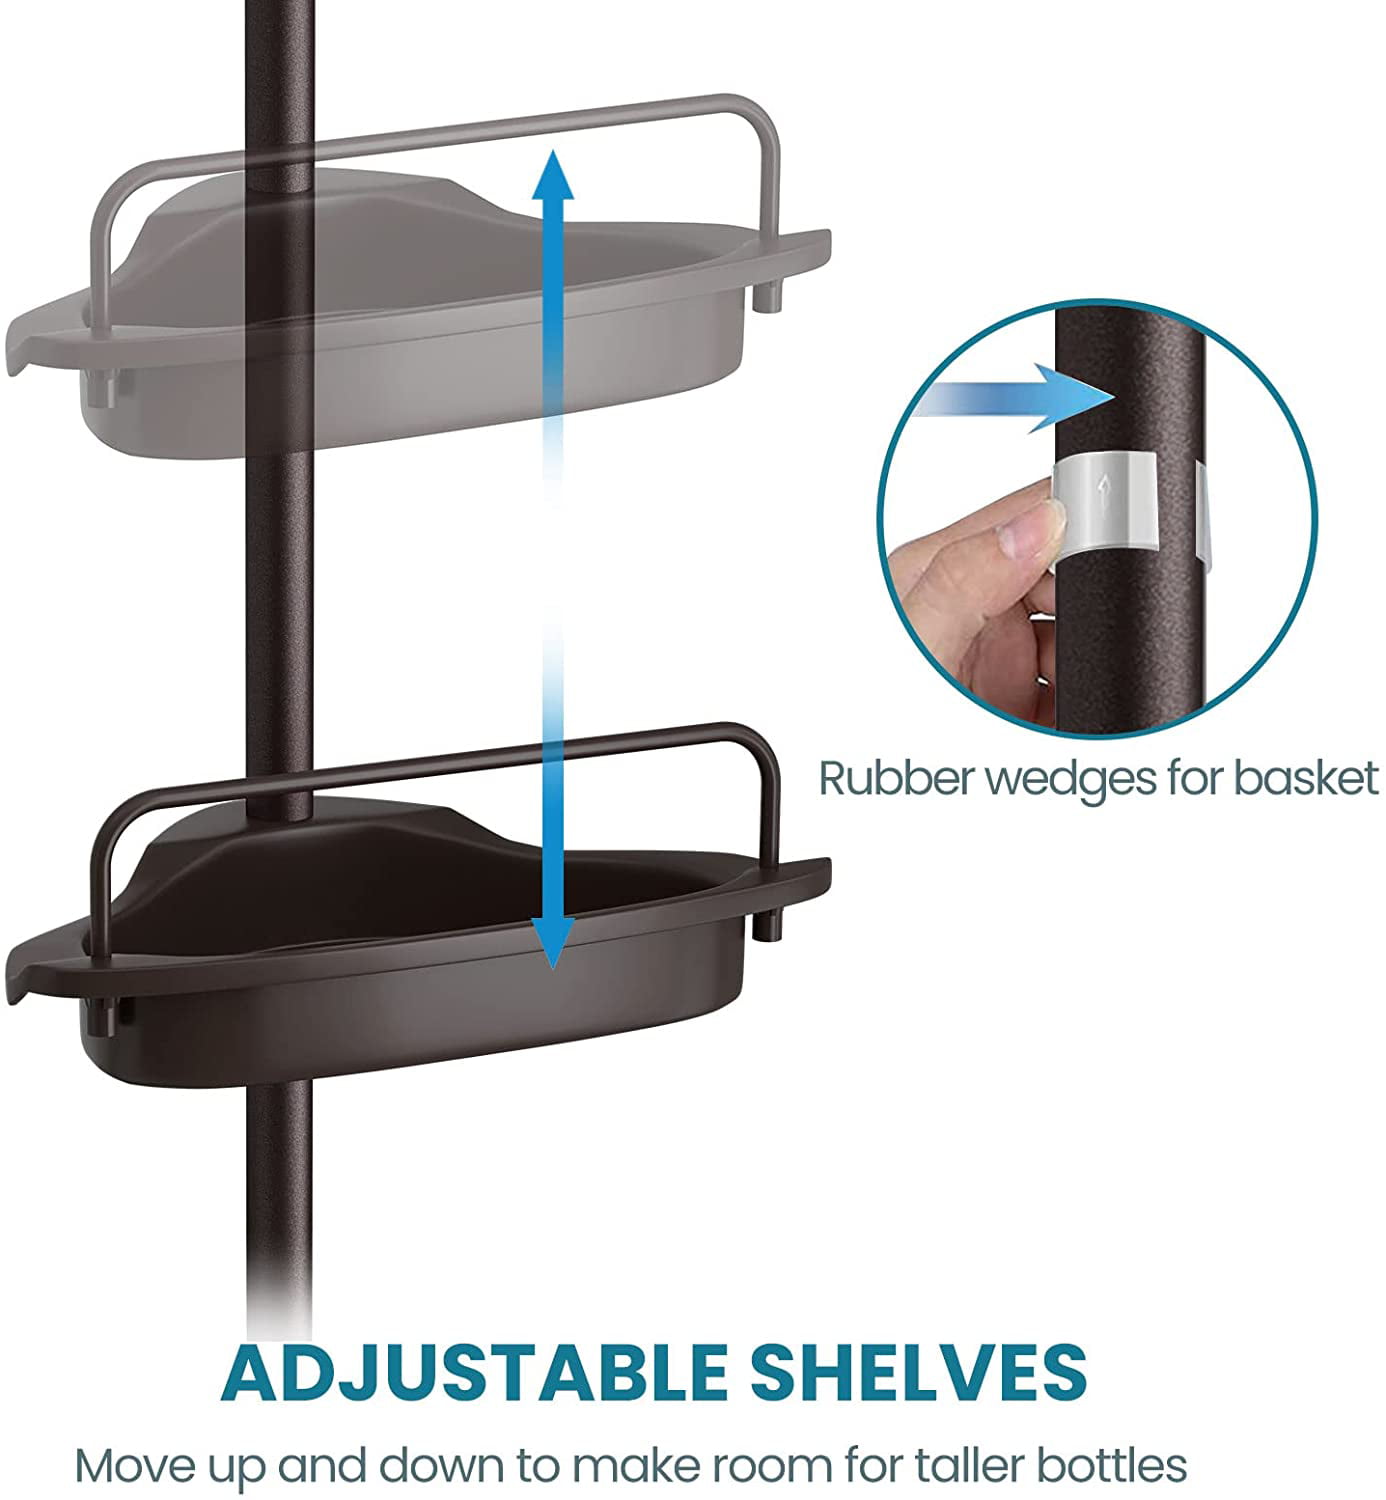 Two Pack - Monster Caddy - shower organizer. 4-tier, PE coated